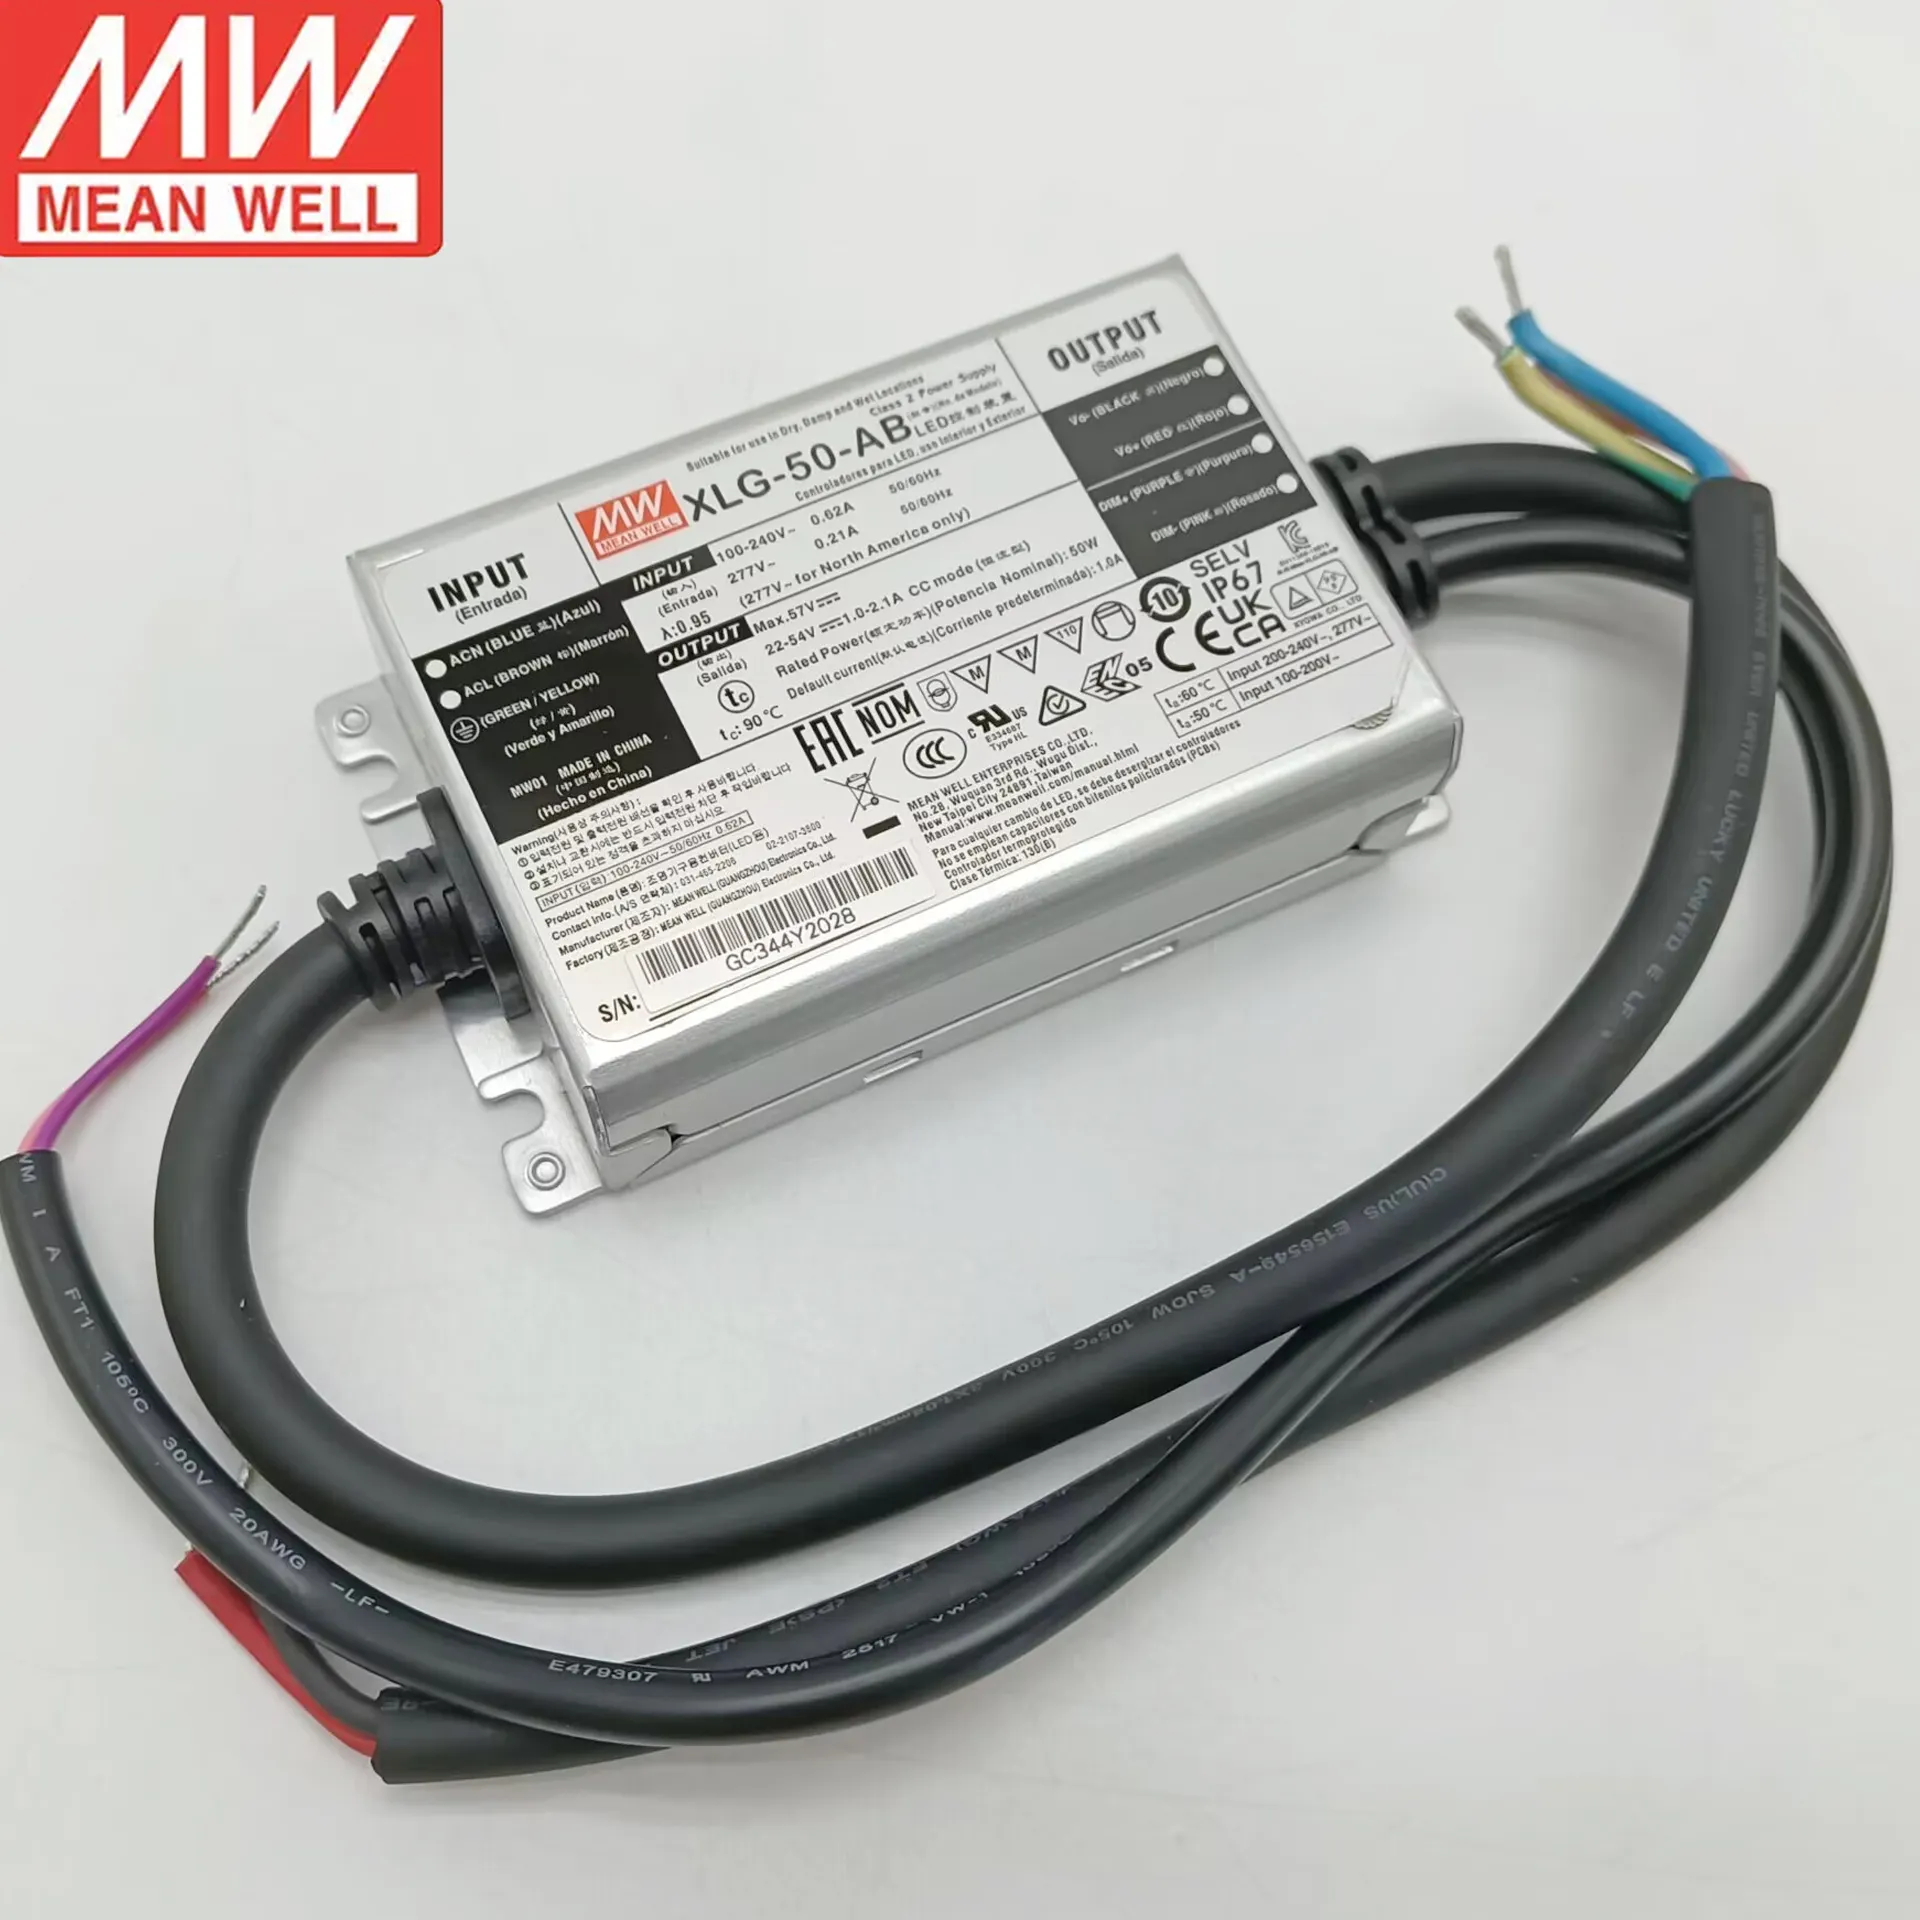 Meanwell XLG-50-AB 50W Led Driver 12v Constant Power Mode LED Driver Mean Well IP67 Driver Warranty 5 Years